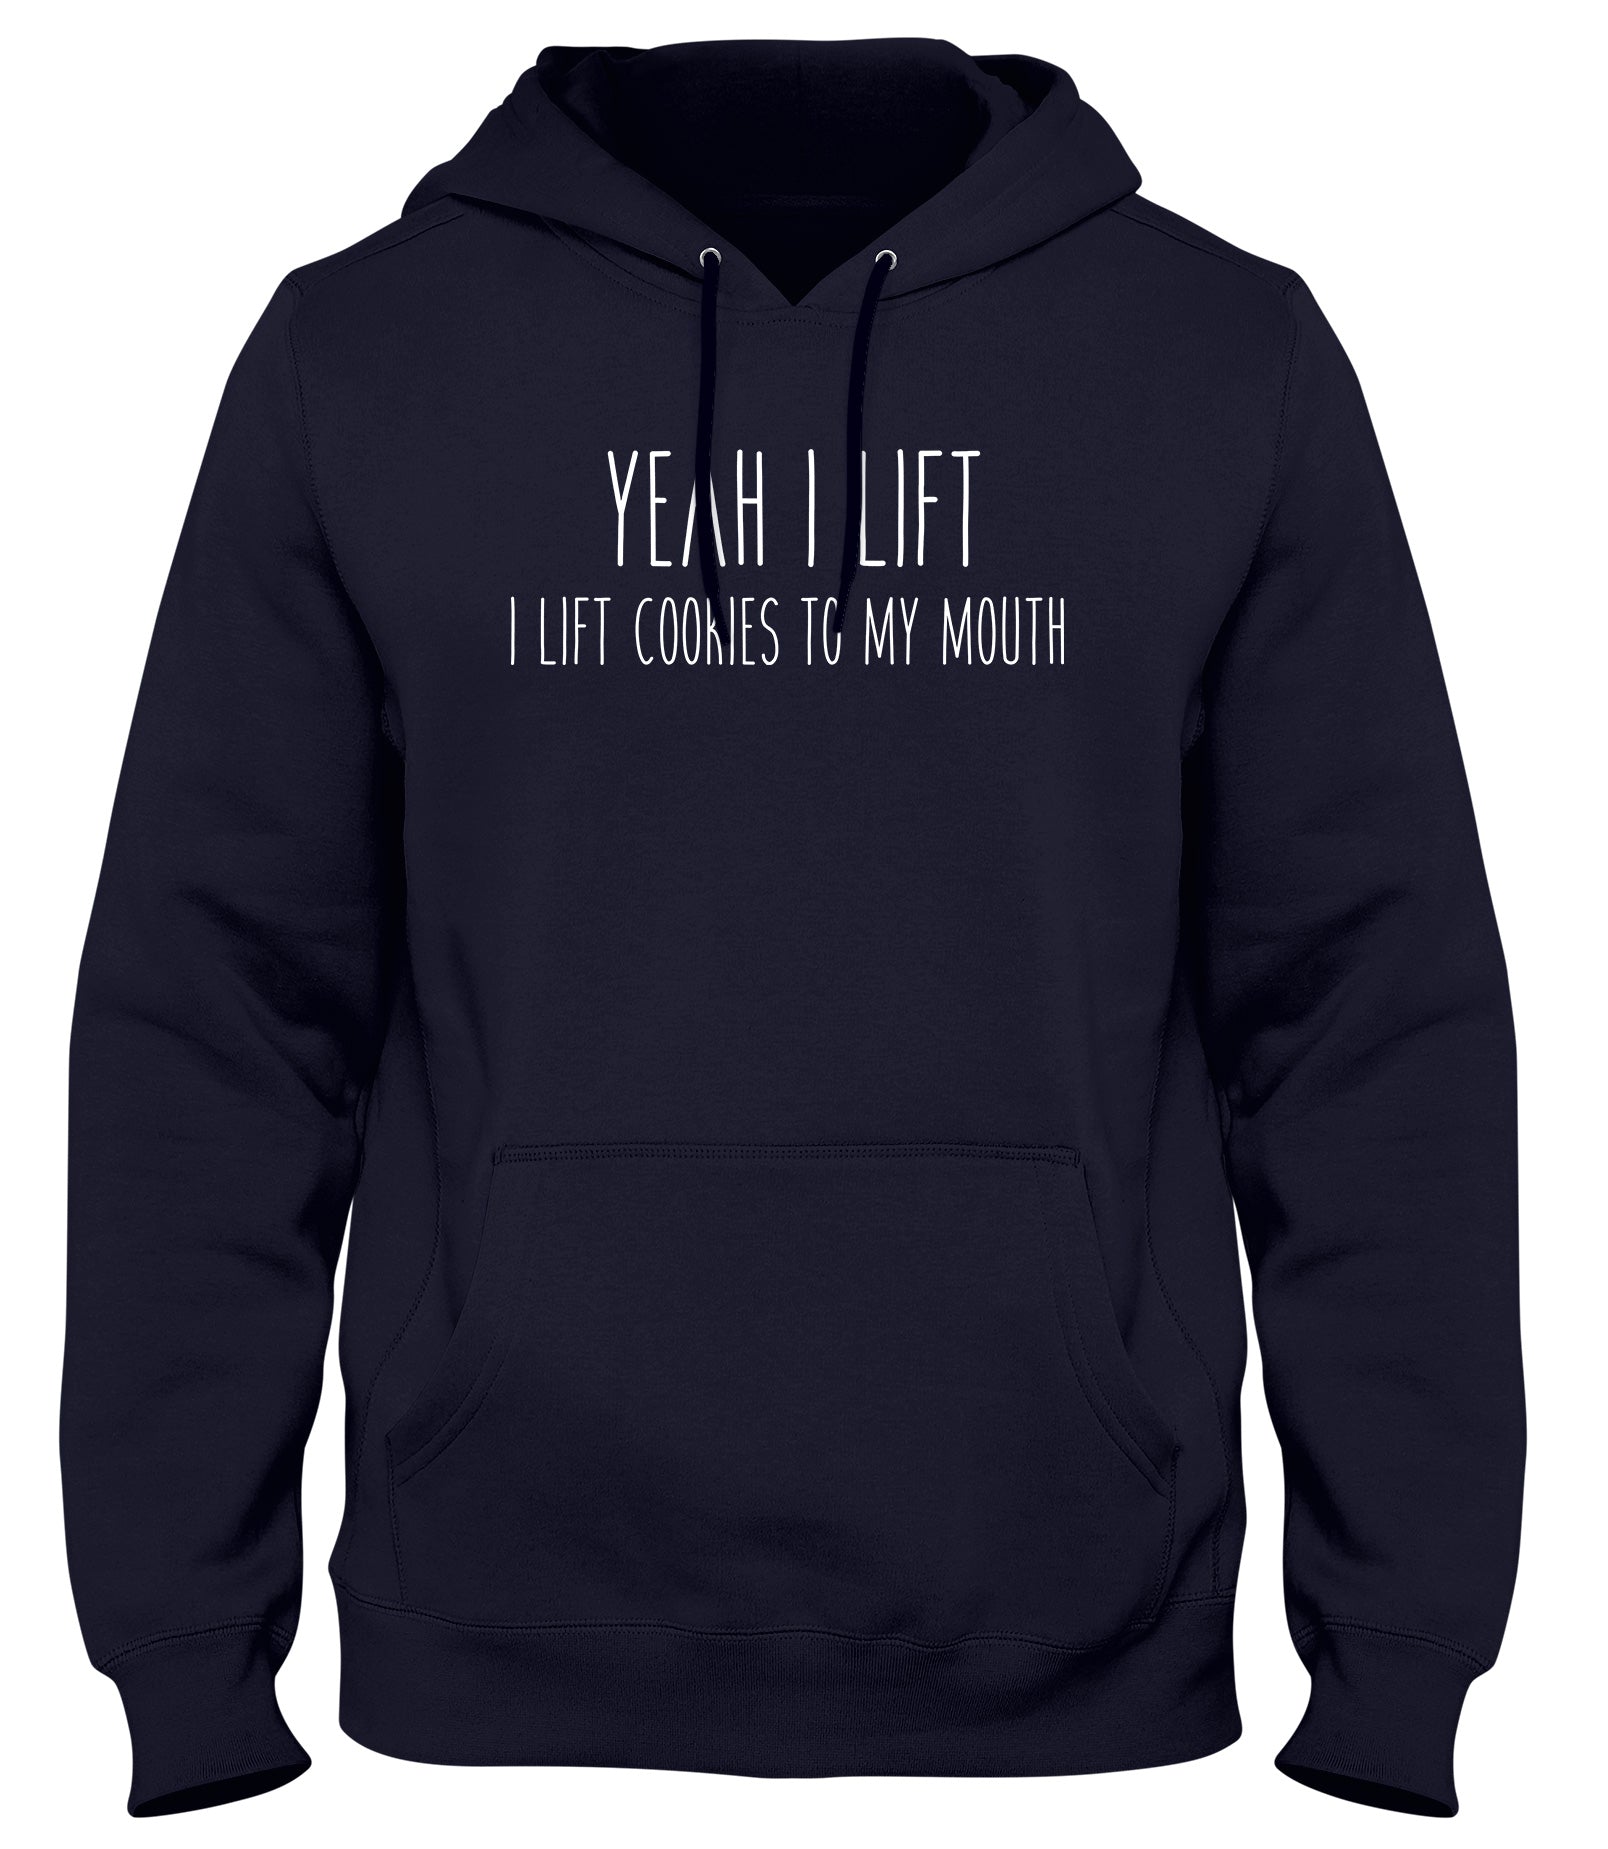 YEAH I LIFT. I LIFT COOKIES TO MY MOUTH MENS WOMENS UNISEX FUNNY HOODIE